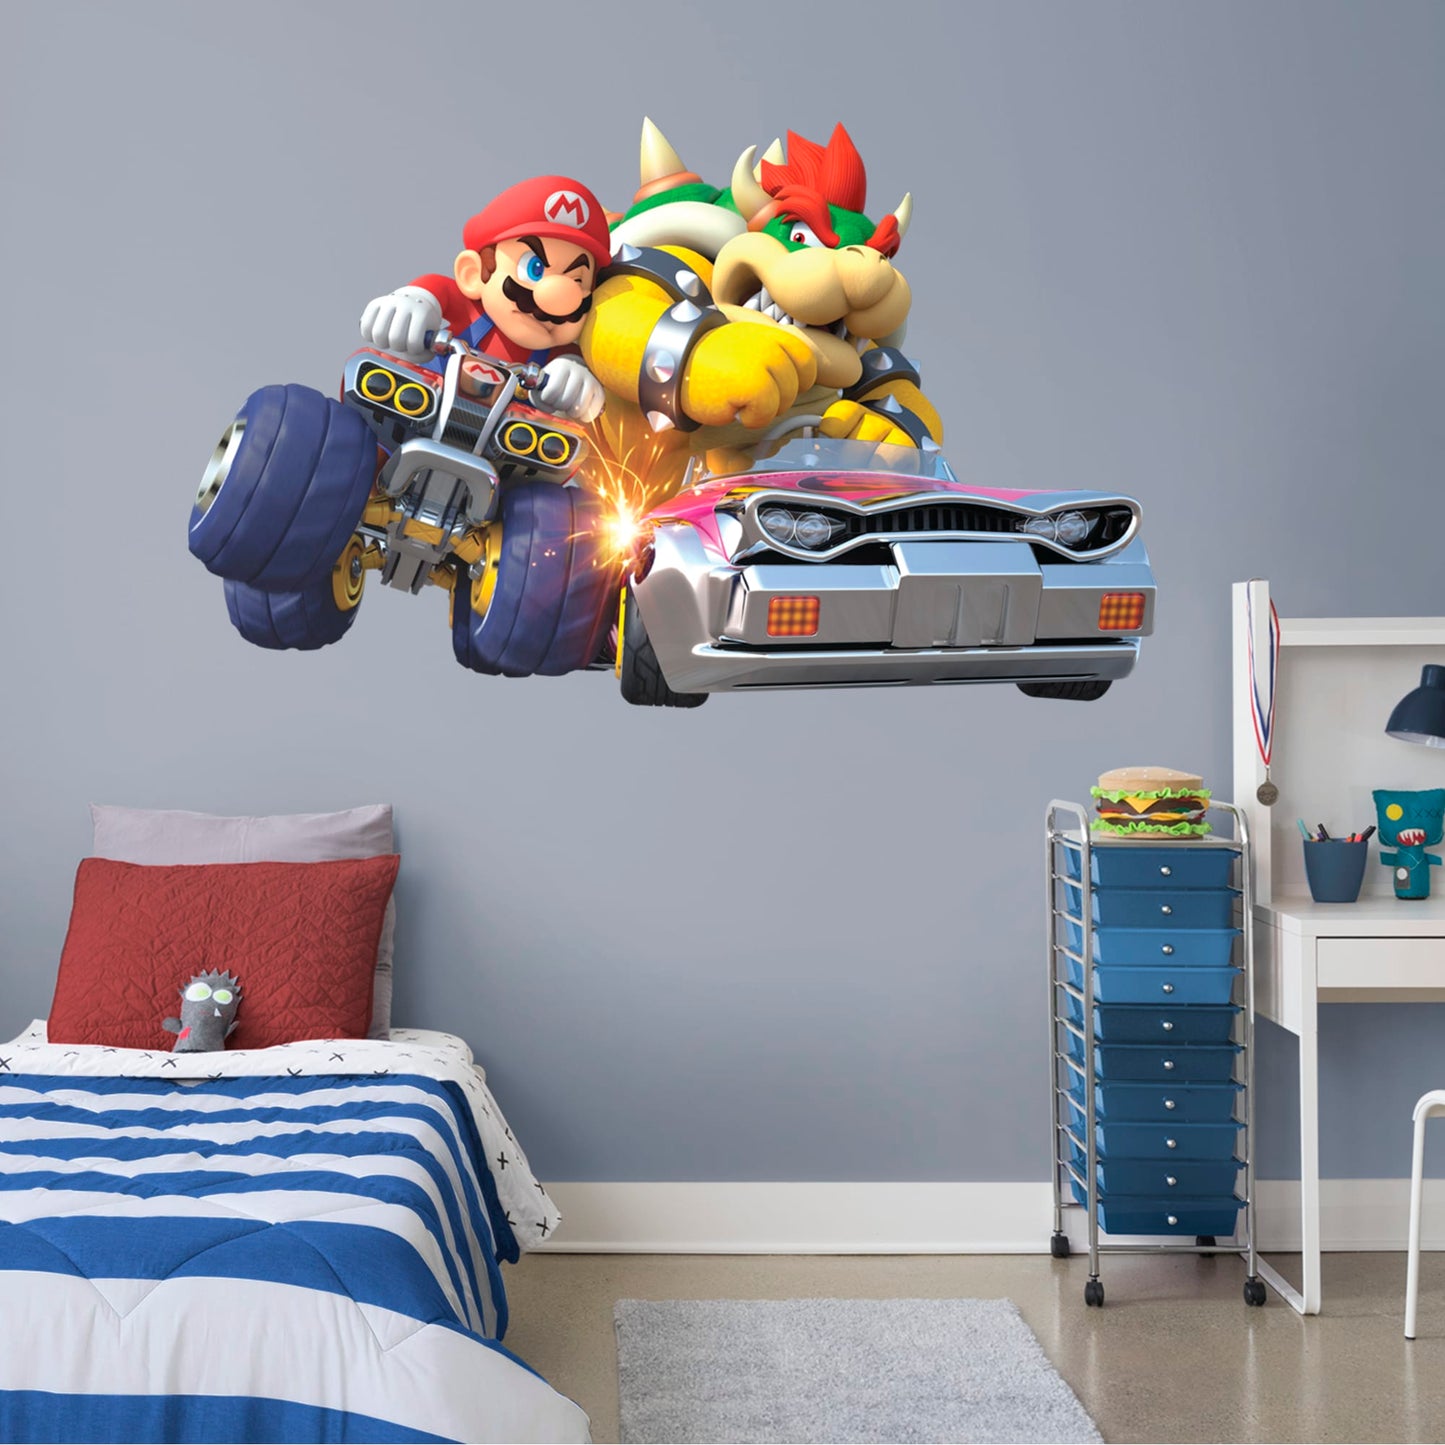 Mario Kart™ 8: Mario and Bowser Collision Mural        - Officially Licensed Nintendo Removable Wall   Adhesive Decal